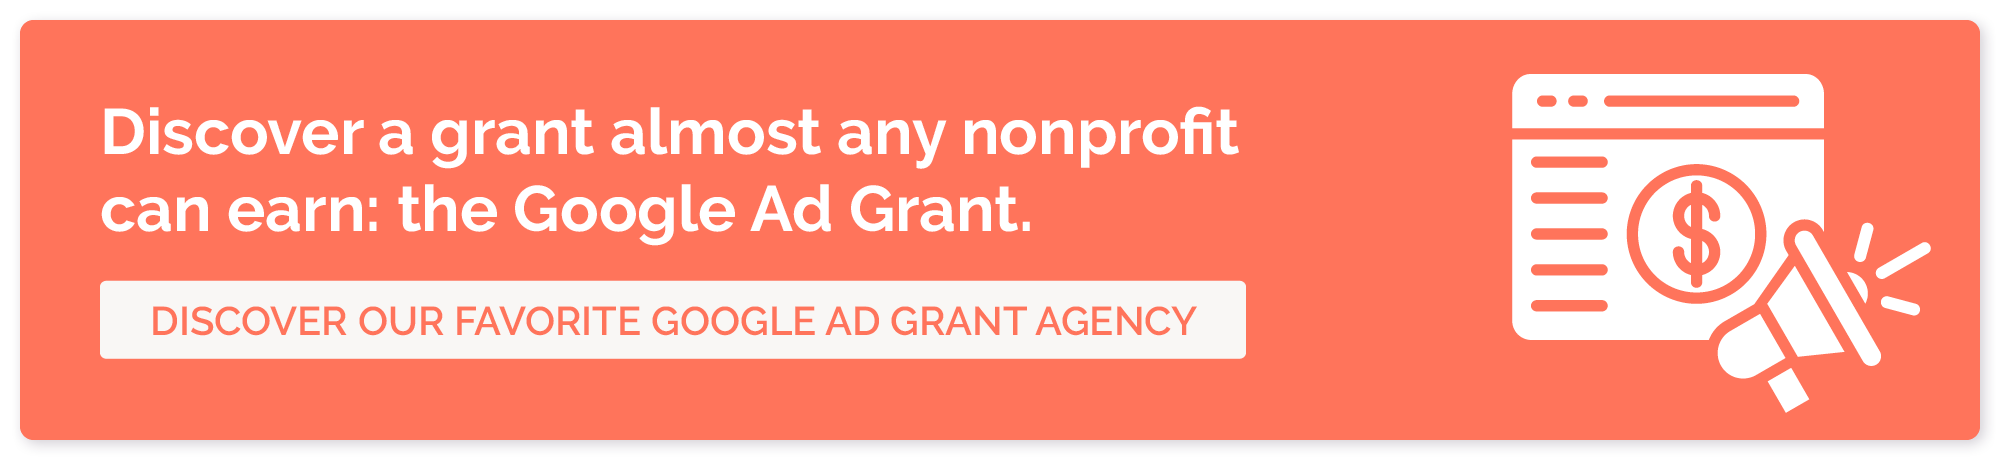 Discover a grant almost any nonprofit can earn: the Google Ad Grant. Discover our favorite Google Ad Grant agency. 